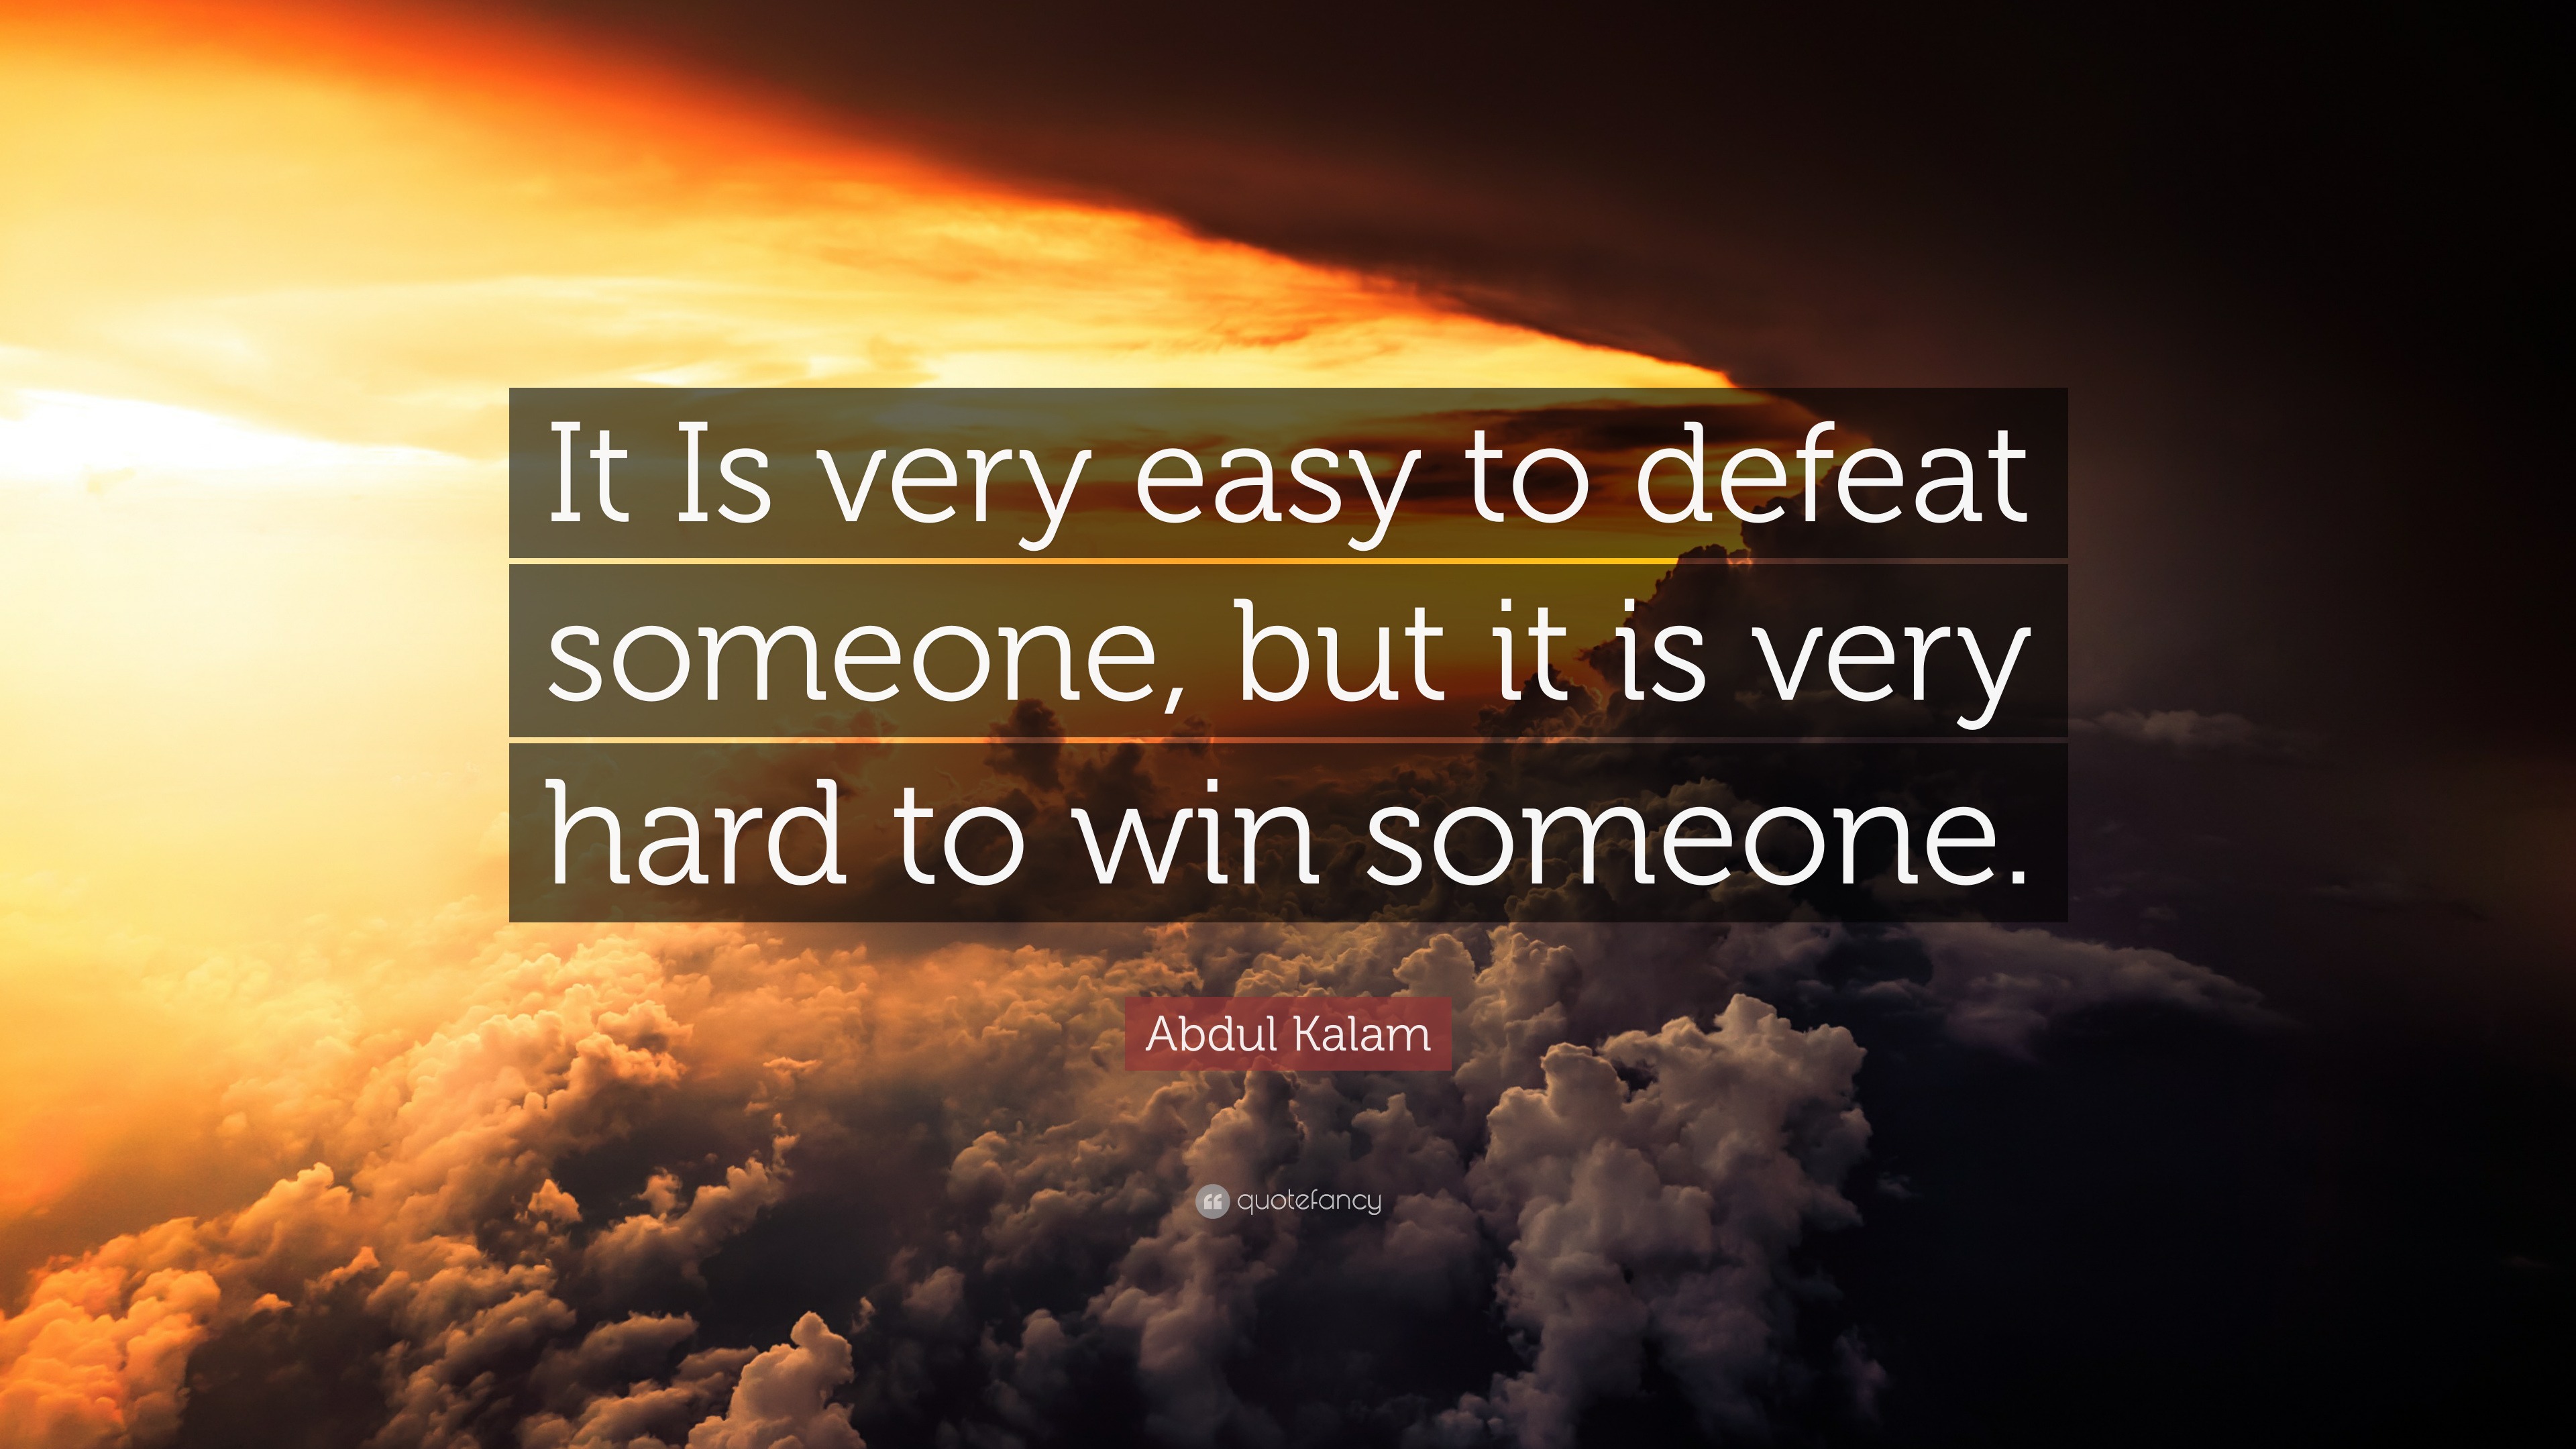 Abdul Kalam Quote “It Is very easy to defeat someone, but